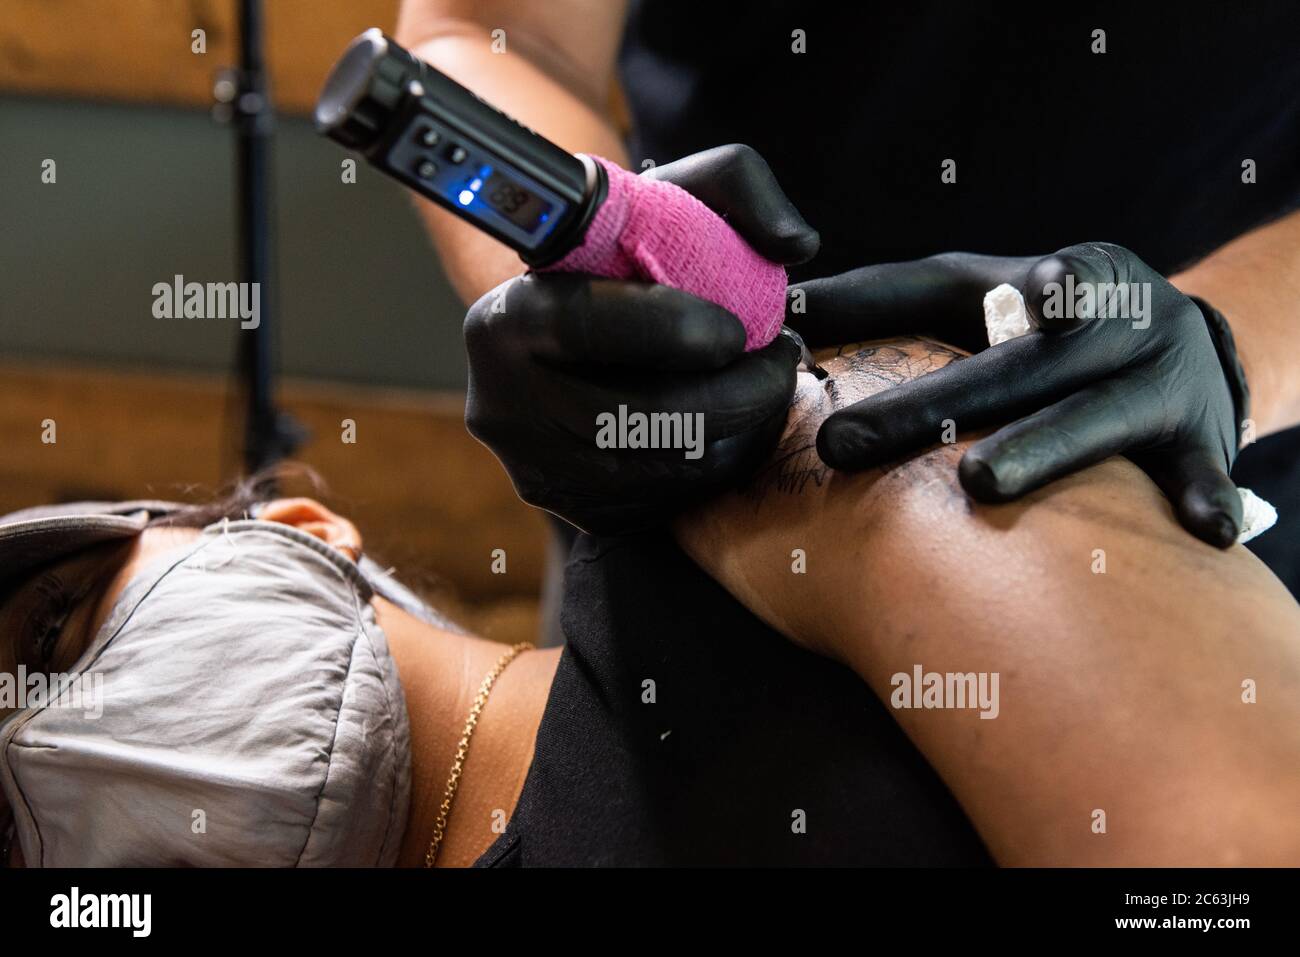 Tattoo artist Ed of 6 Skulls NYC tattoes a lion head on the arm of a client wearing a face mask as New York City enters Phase 3 of the Coronavirus opening on July 6, 2020, in New York City. (Photo by Gabriele Holtermann/Sipa USA) Credit: Sipa USA/Alamy Live News Stock Photo